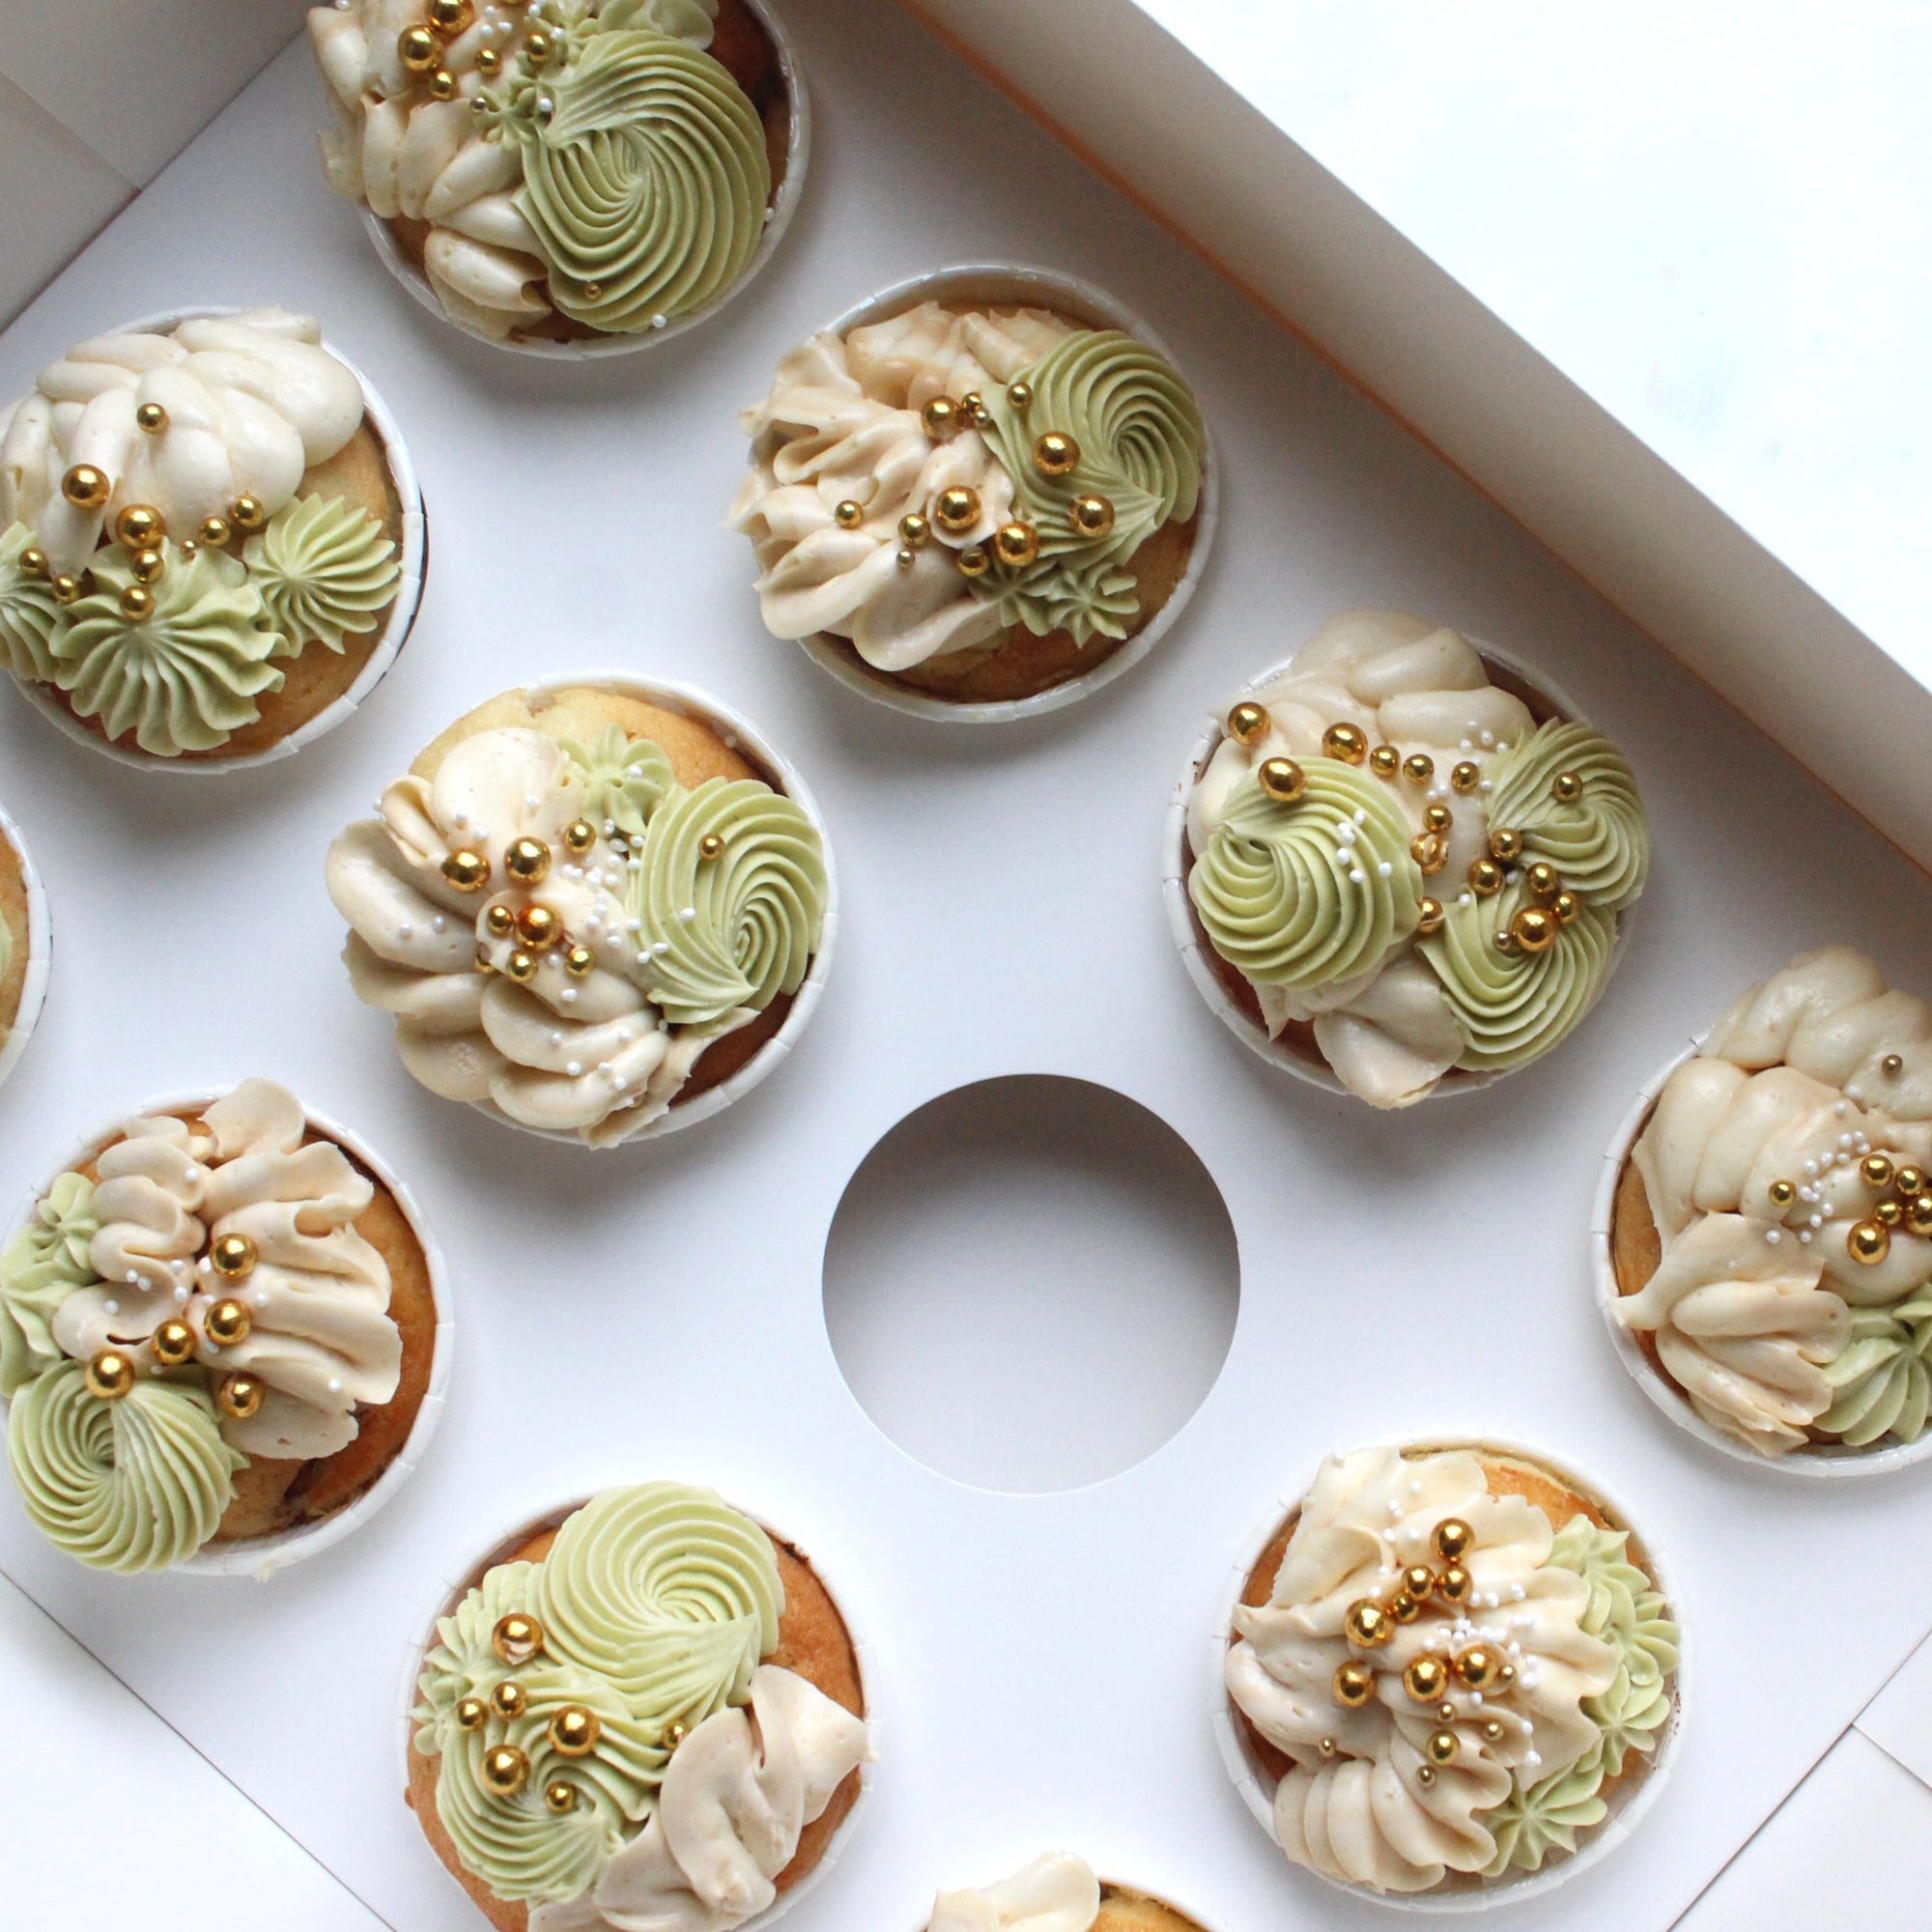 Cupcakes - our smallest sweet treats with gorgeous green buttercream piping!